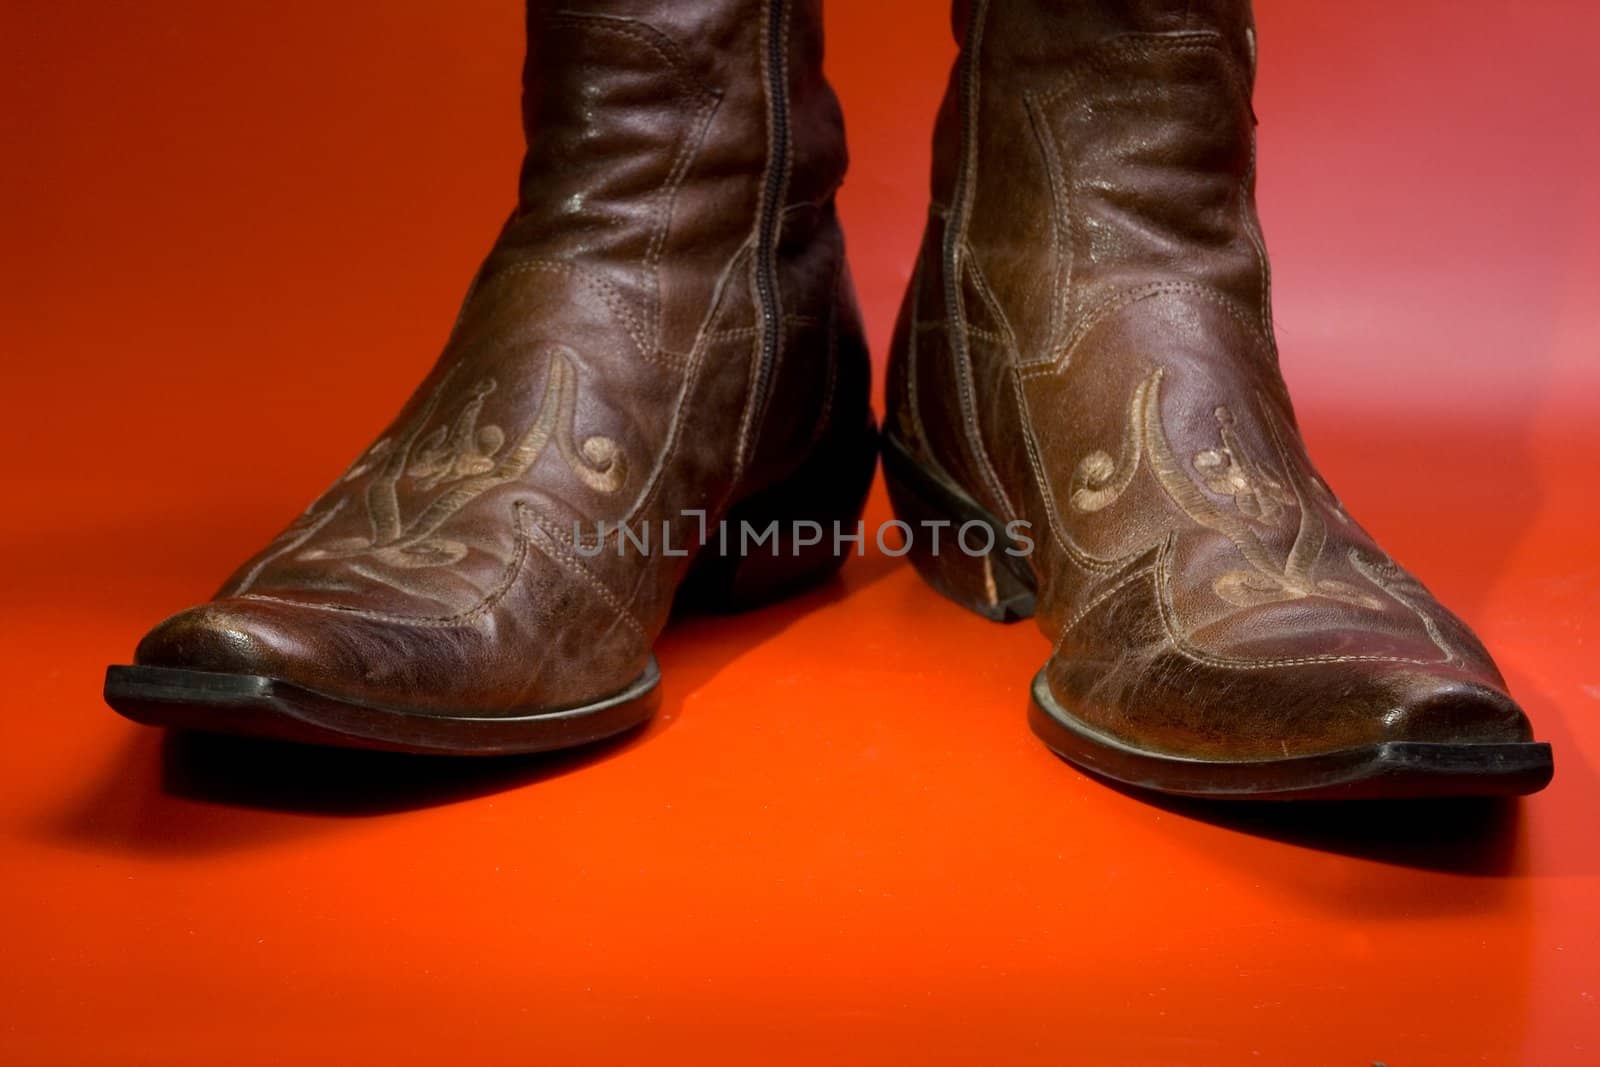 The ornate man's boots  on a red background